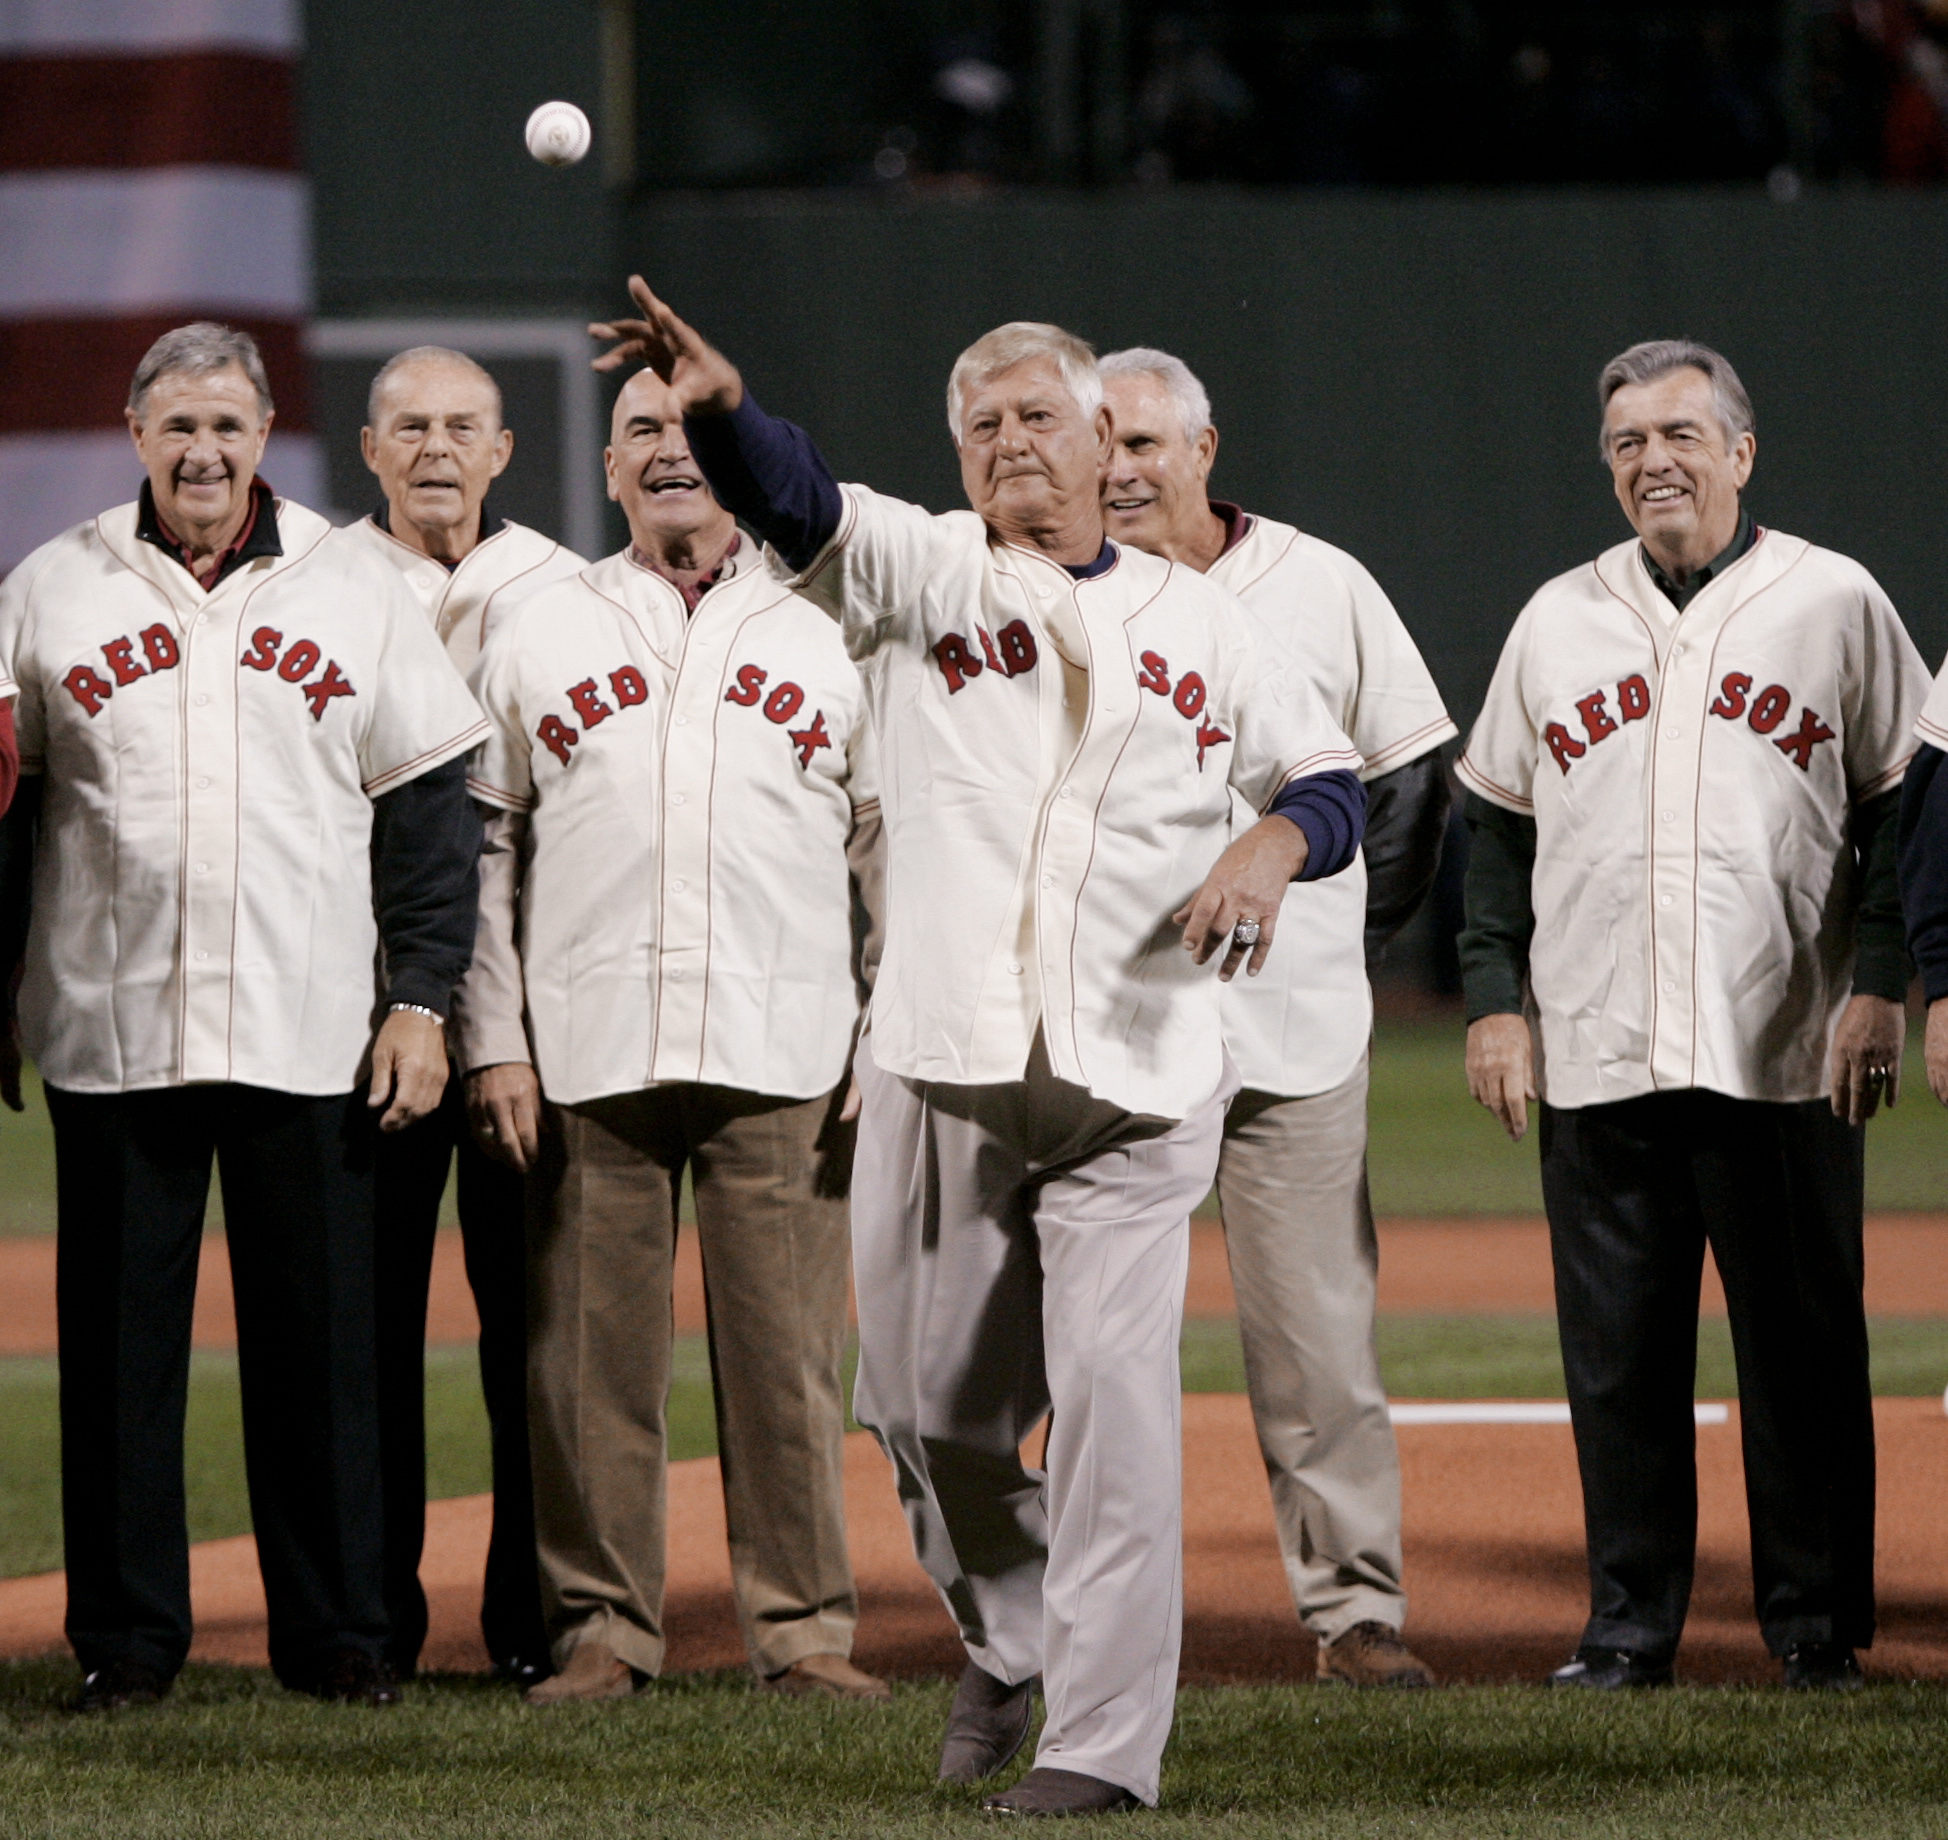 Tom Caron: Yaz was a man of the people